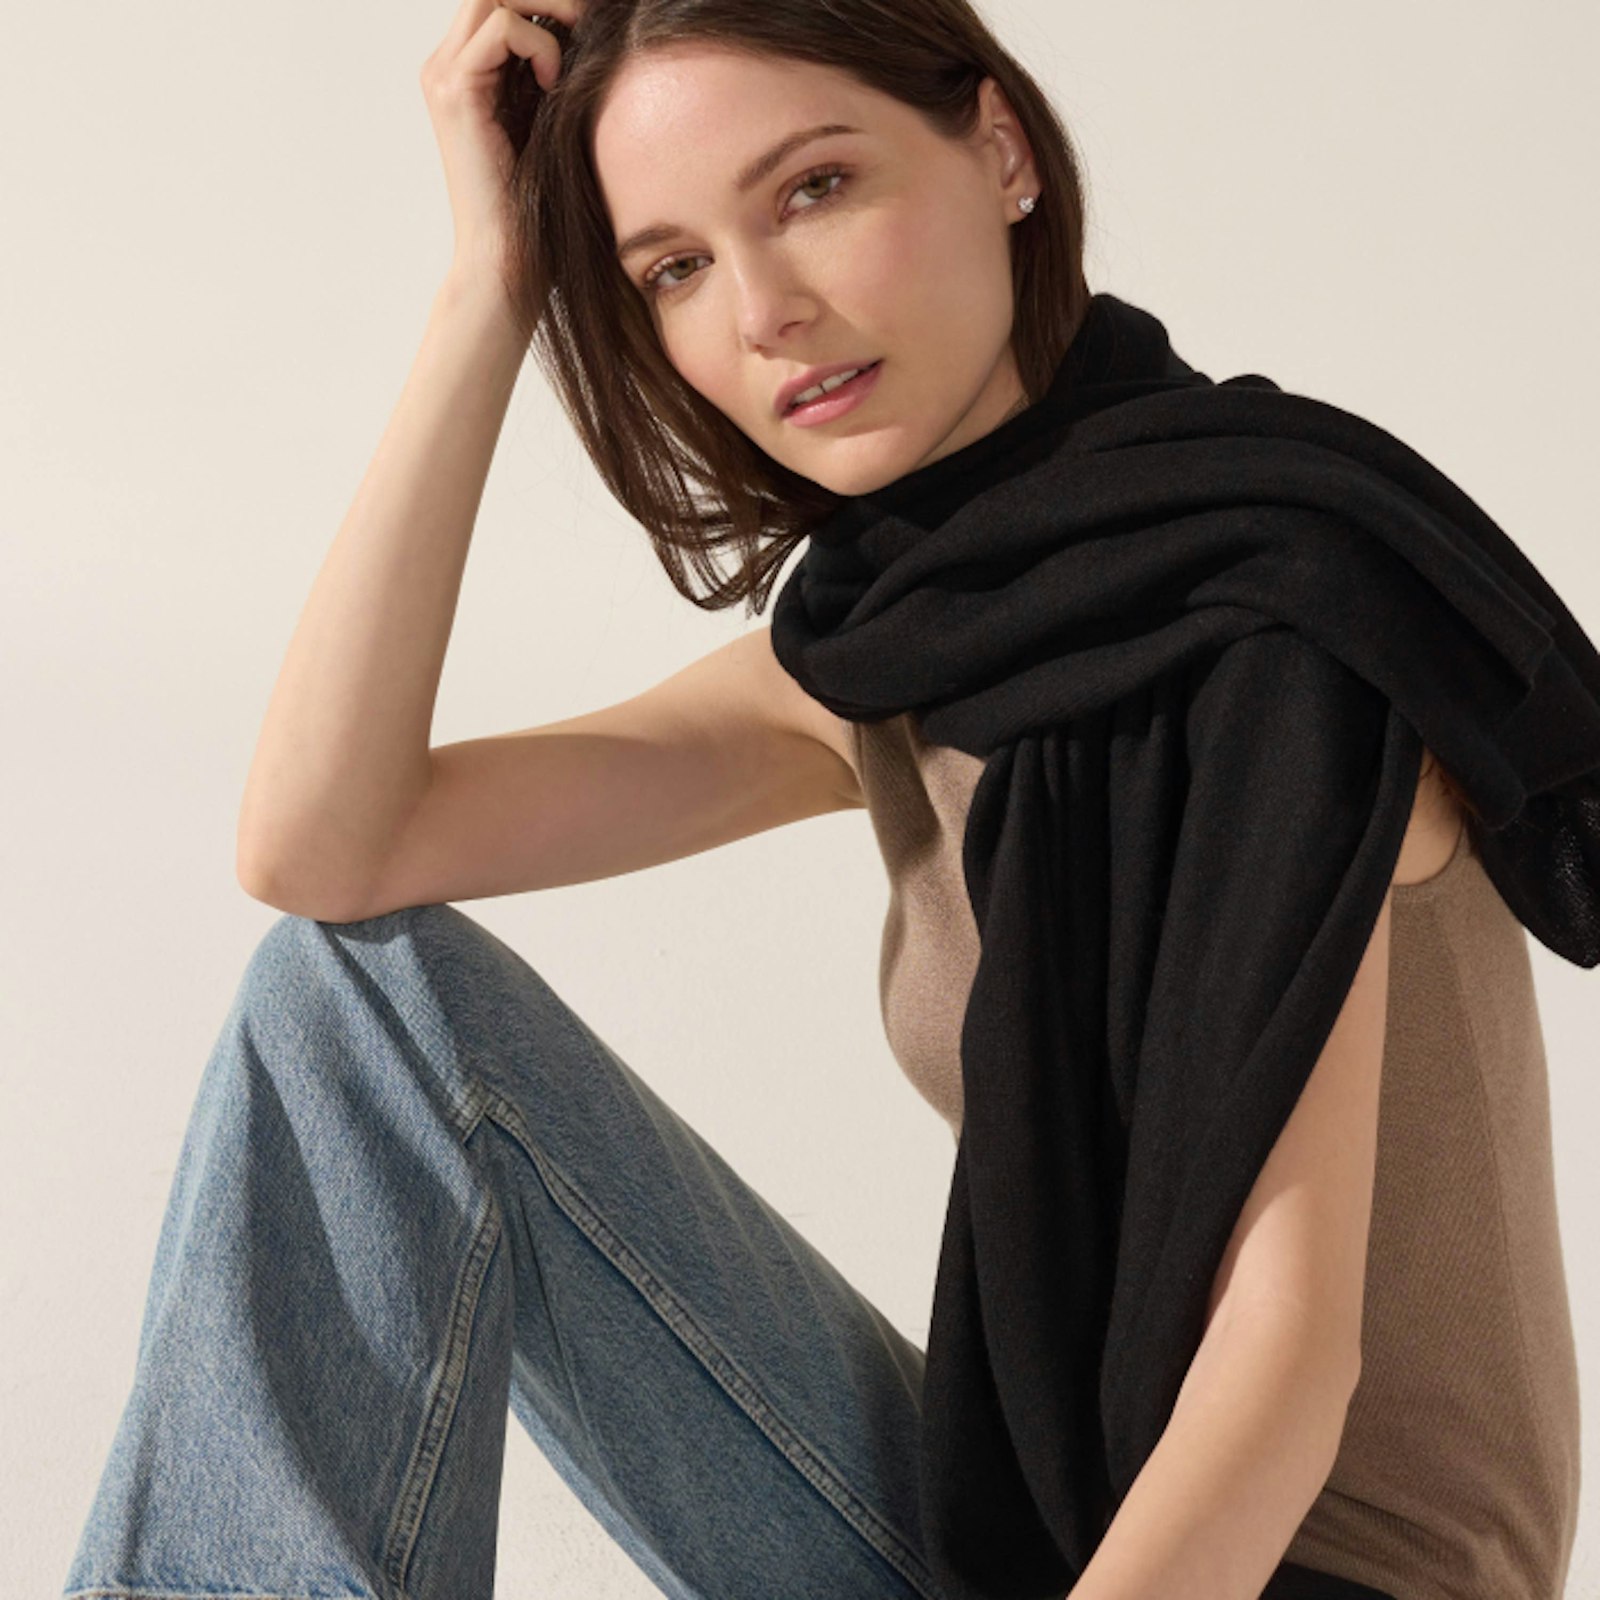 Featherlight cashmere scarf, lightweight high quality 100% cashmere wrap